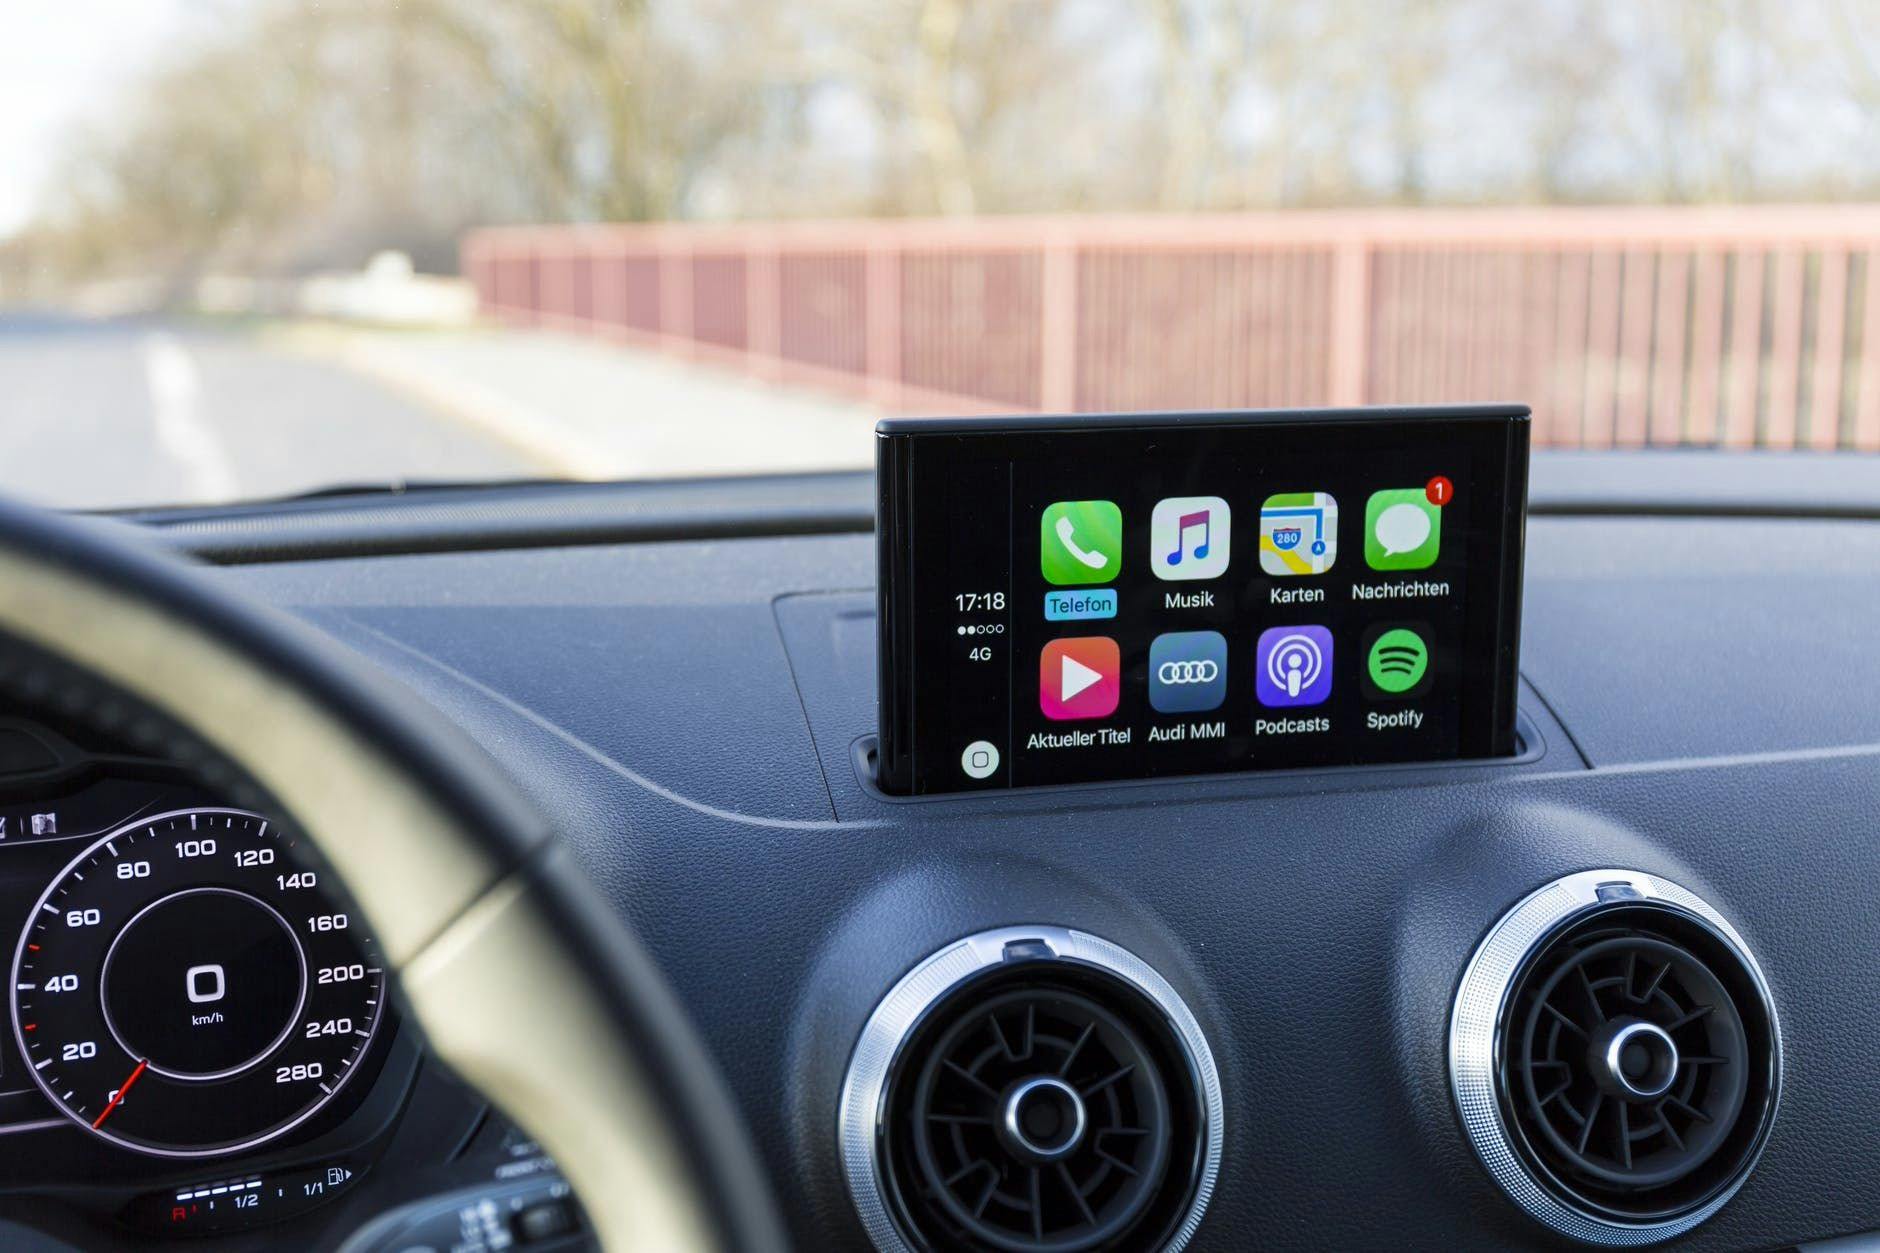 I Tried Turning a Smartphone Into an Infotainment Screen. It Didn't Work